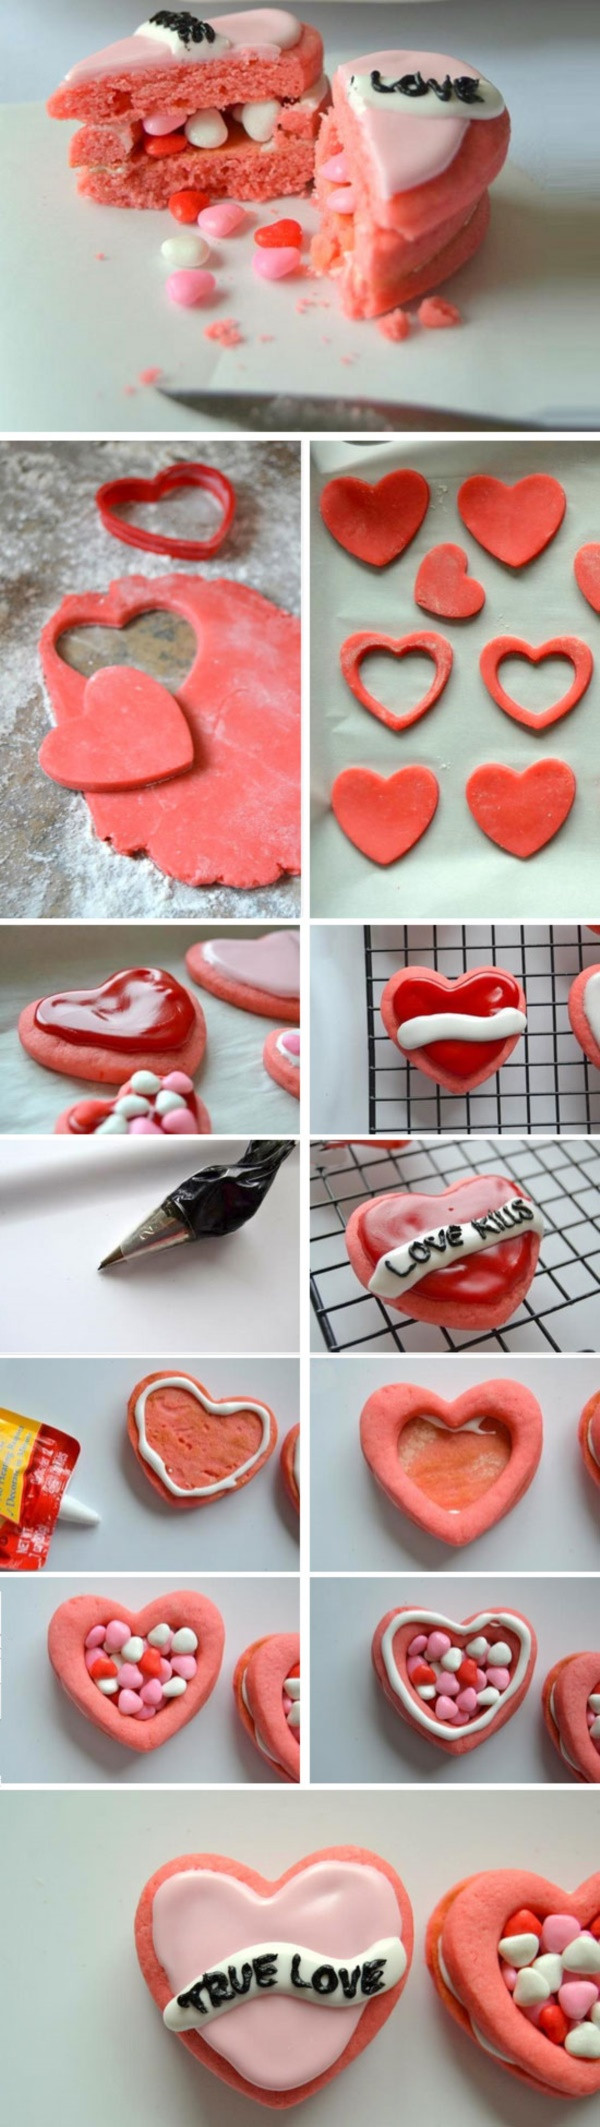 Valentine'S Day Gift Ideas For Him Homemade
 101 Homemade Valentines Day Ideas for Him that re really CUTE